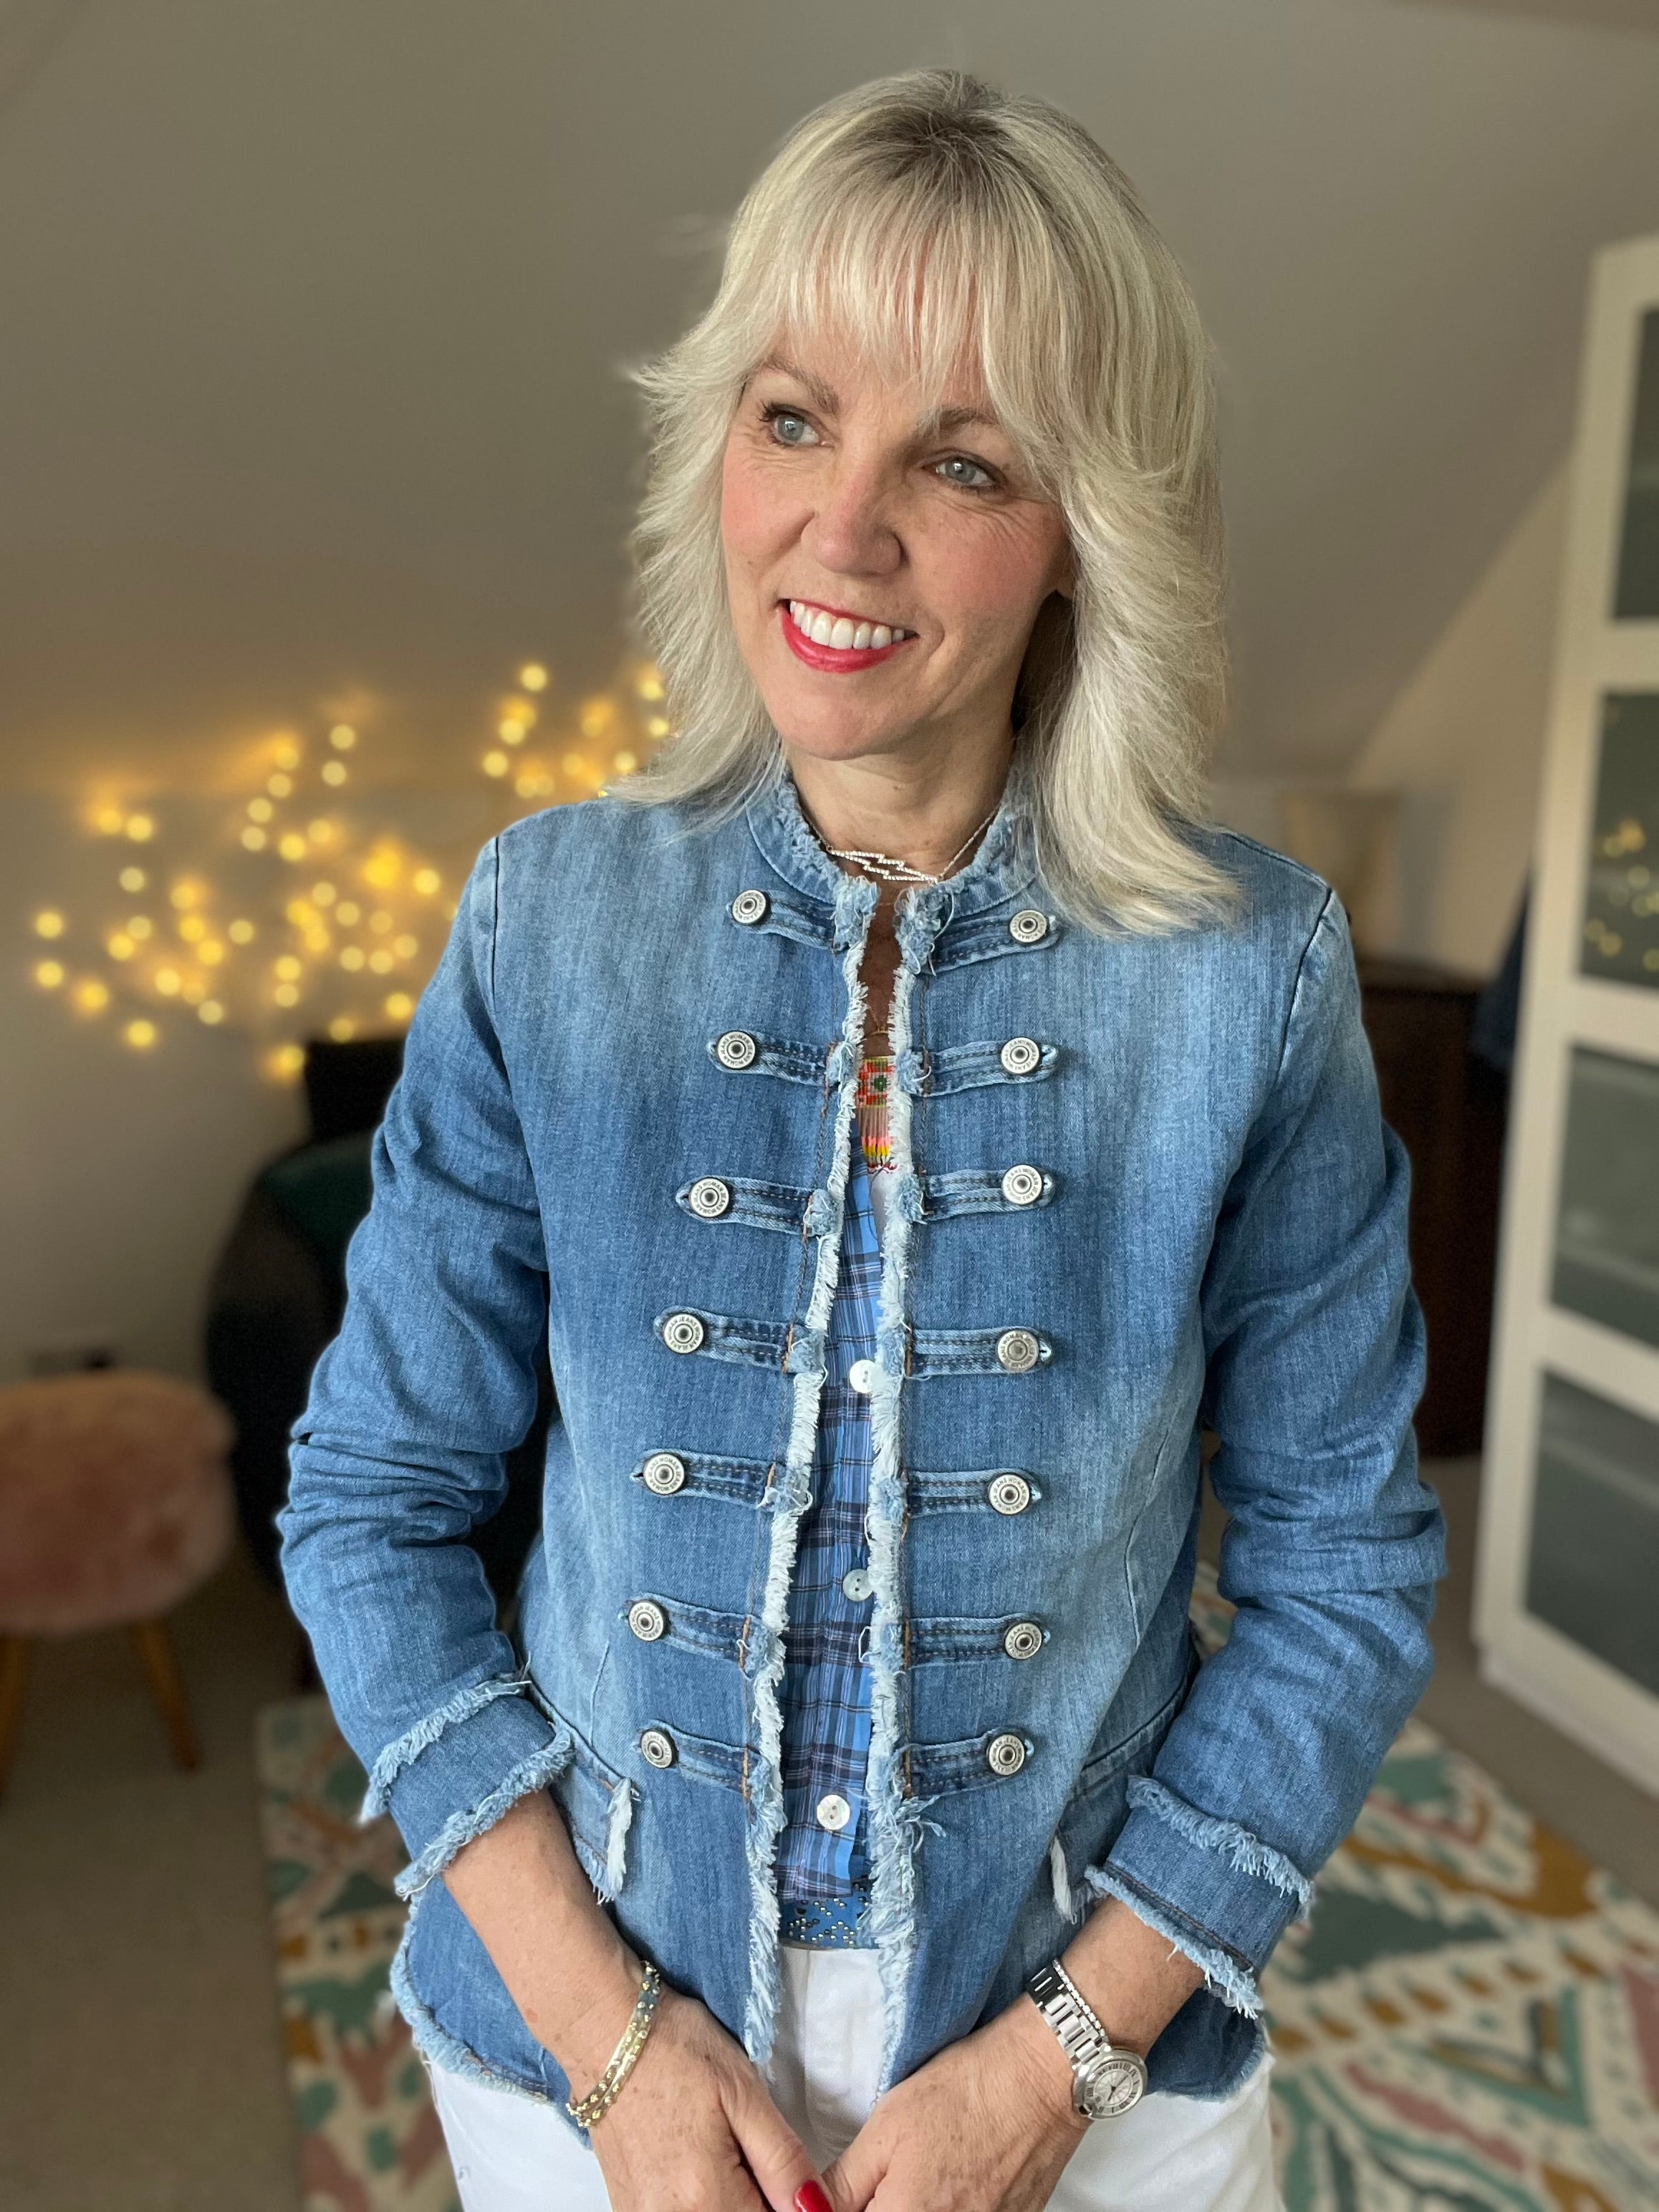 Military Jacket With frayed edges in Denim